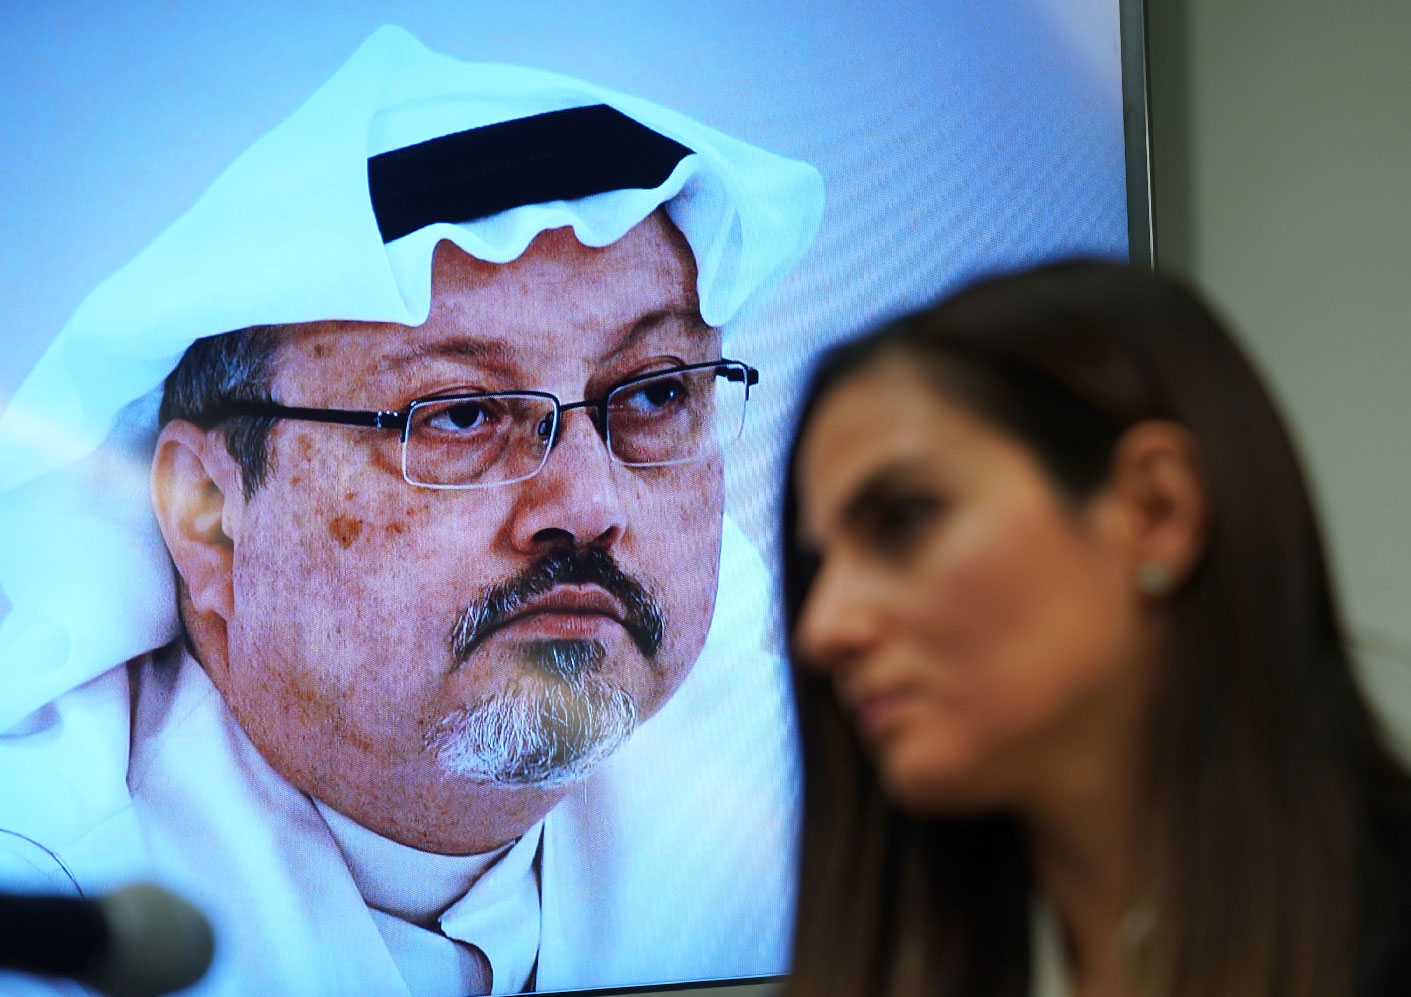 Sherine Tadros, head of New York (UN) Office of Amnesty International, speaks in front of a picture of Jamal Khashoggi during a news conference at the United Nations.